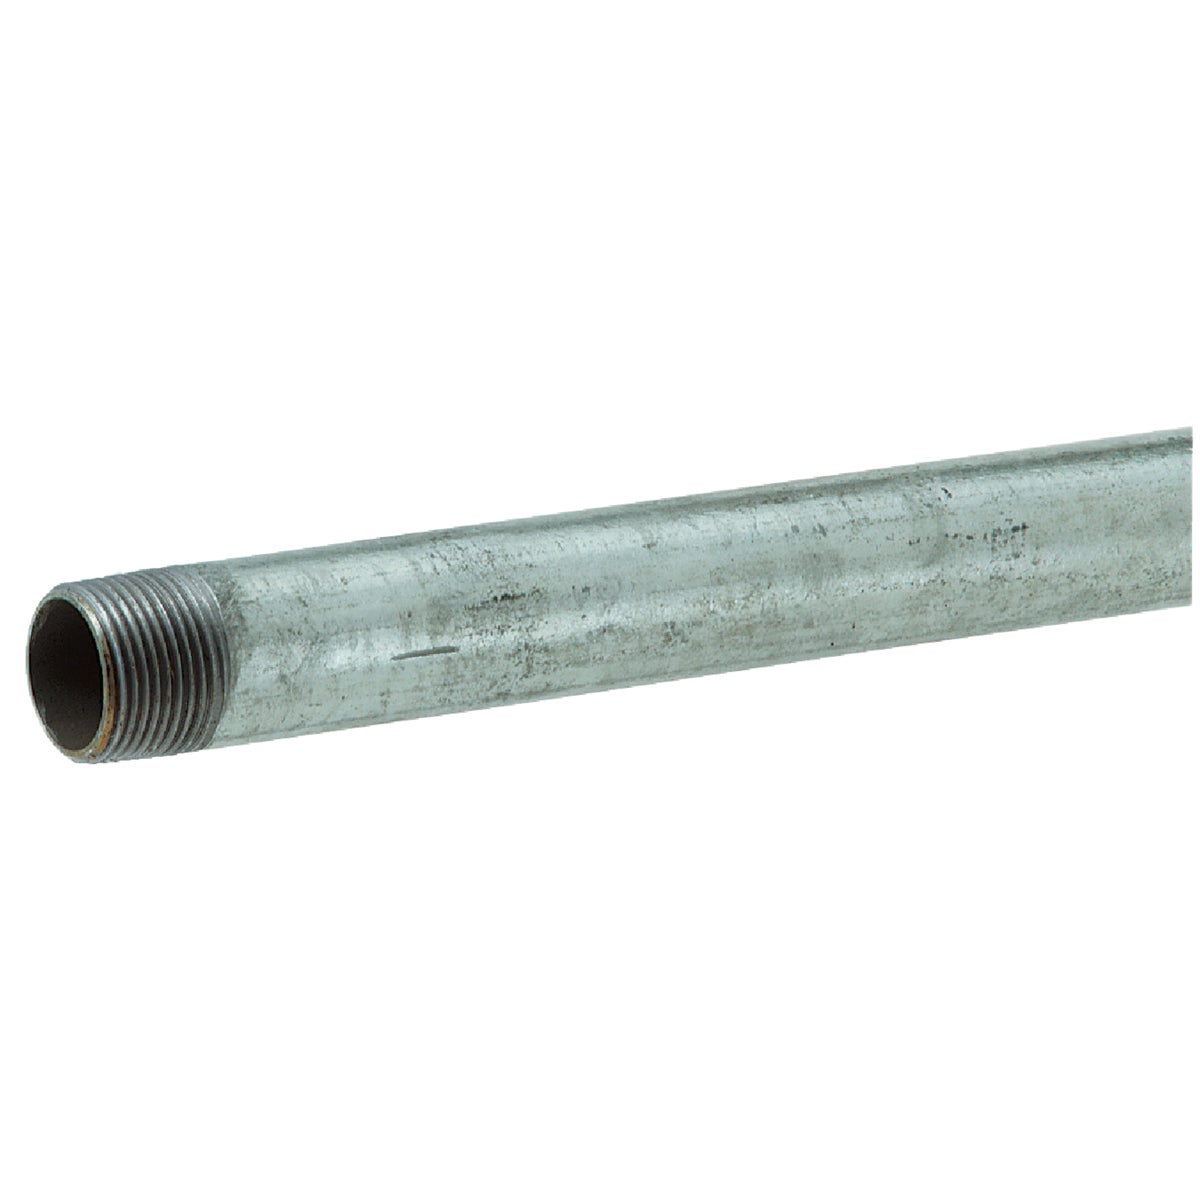 Southland 1/2 In. x 24 In. Carbon Steel Threaded Galvanized Pipe